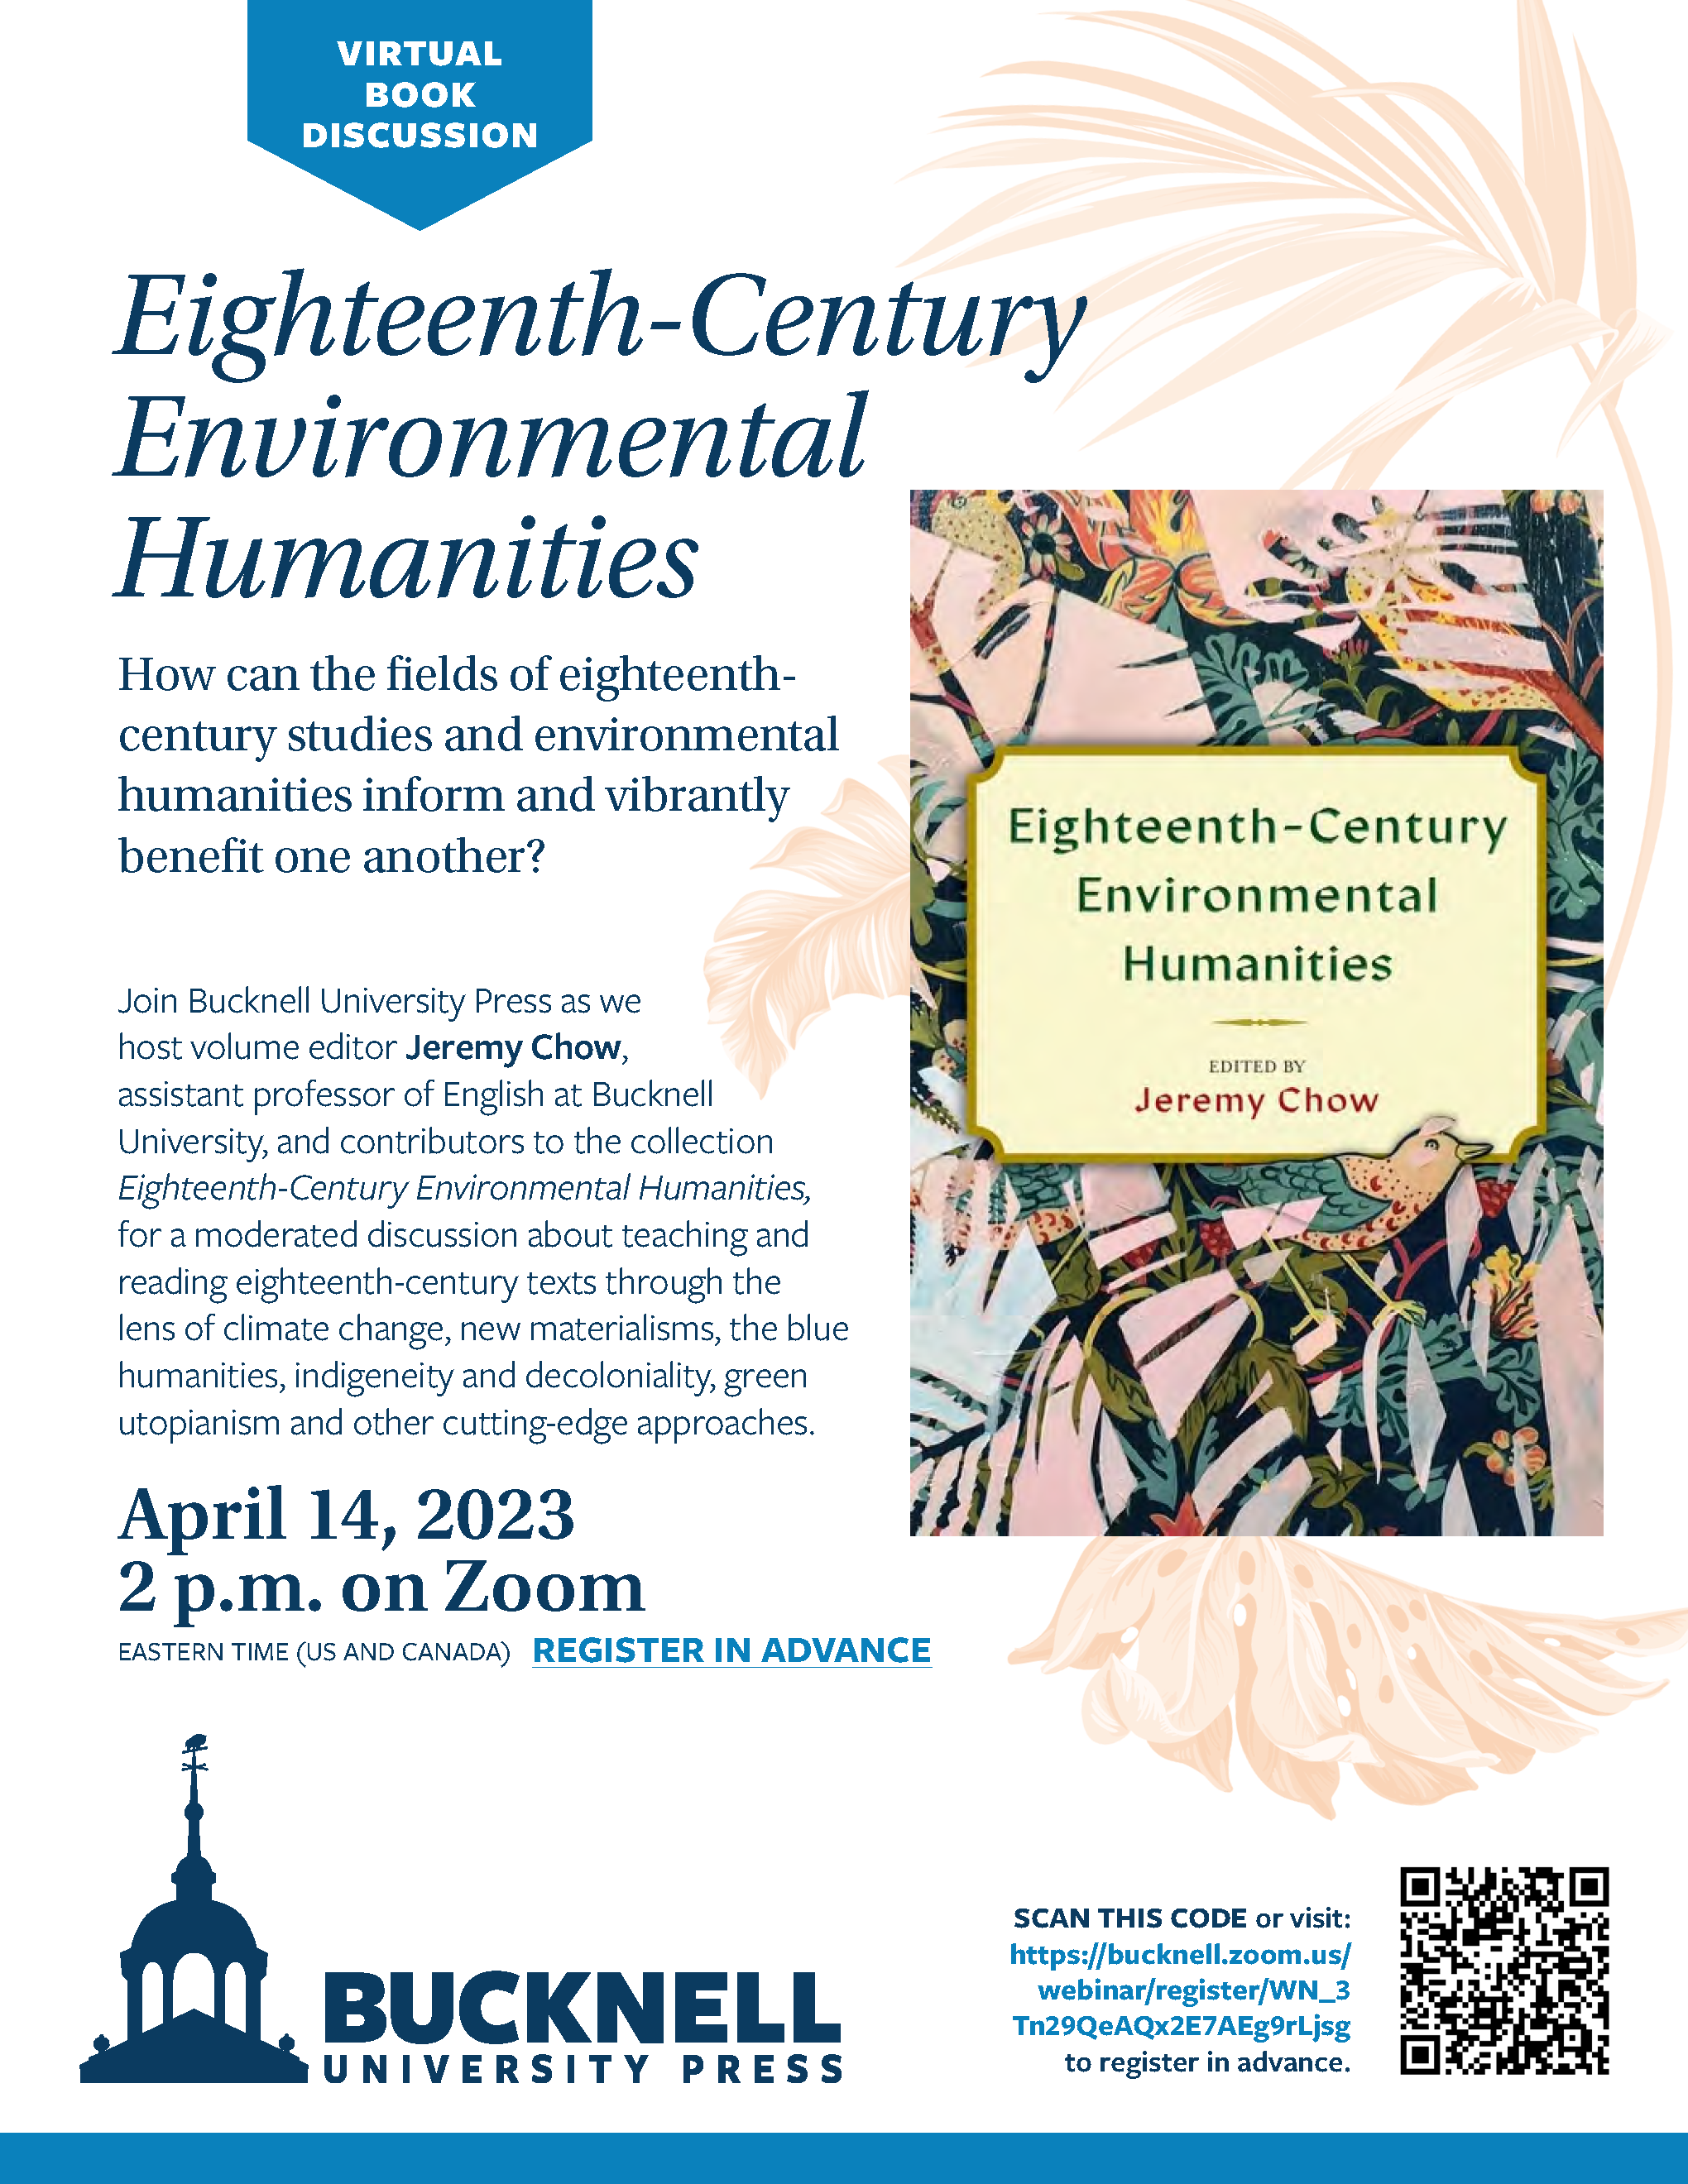 Book even flyer, white with dark blue lettering, depicting Bucknell University Press logo and cover of book Eighteenth-Century Environmental Humanities with pink, green, and blue tropical print in the background.